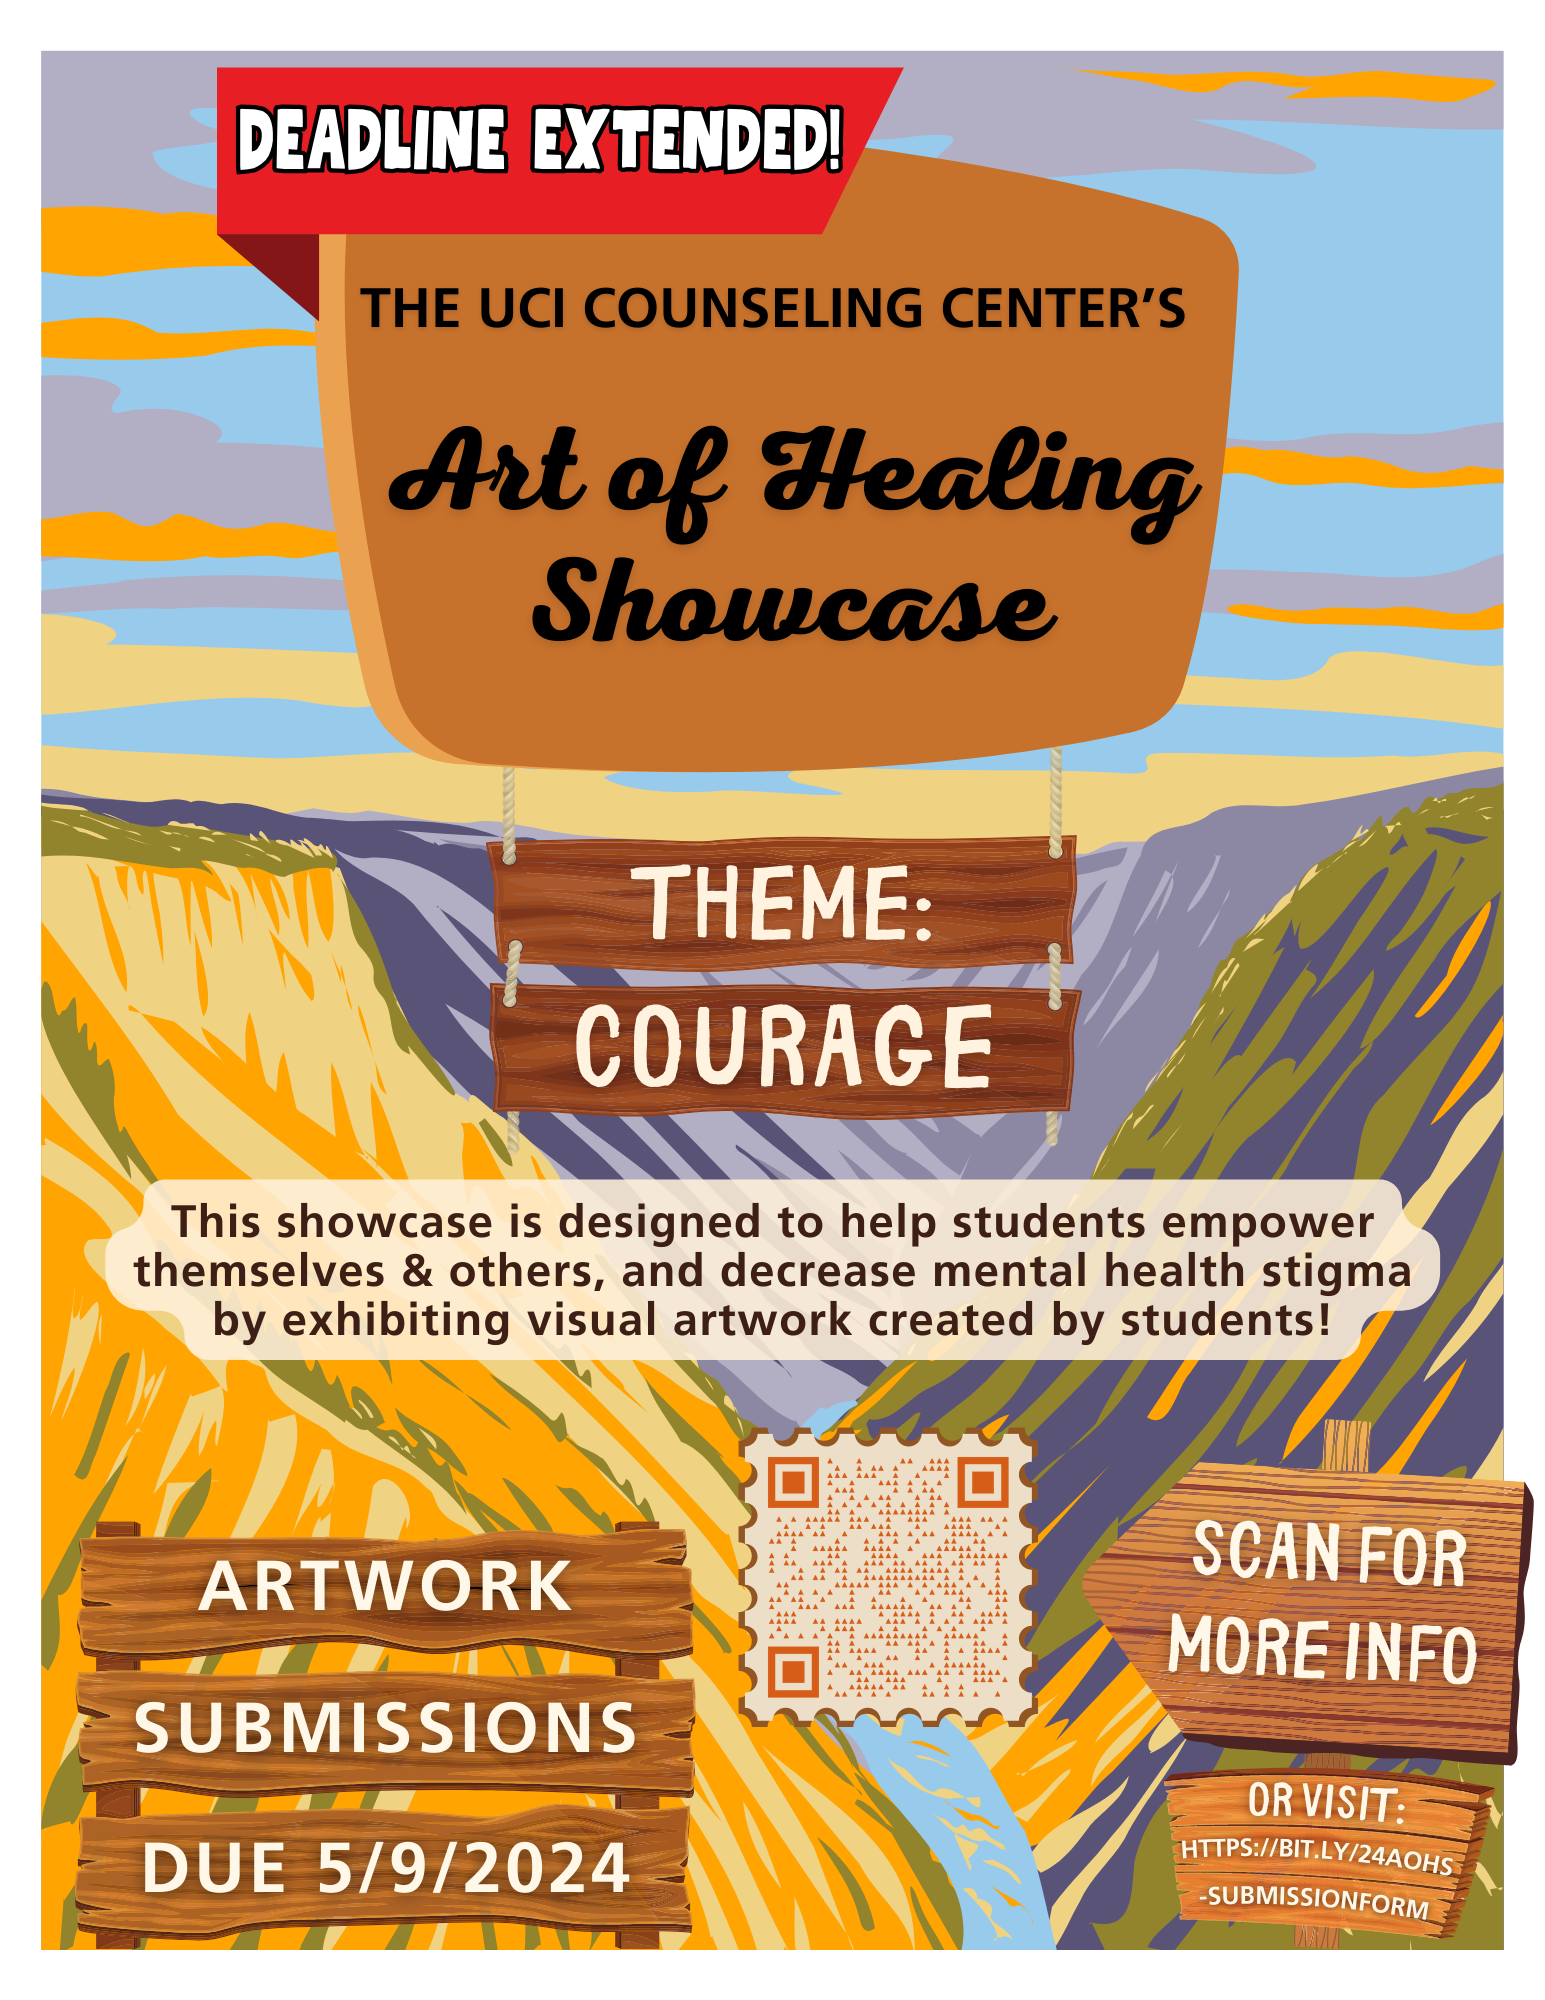 Deadline Extended! The UCI Counseling Center’s Art of Healing Showcase Theme: Courage Artwork Submissions DUE 5/9/2024 This showcase is designed to help students empower themselves & others, and decrease mental health stigma by exhibiting visual artwork created by students! Scan for more info Or visit: https://bit.ly/24AOHS-SubmissionForm